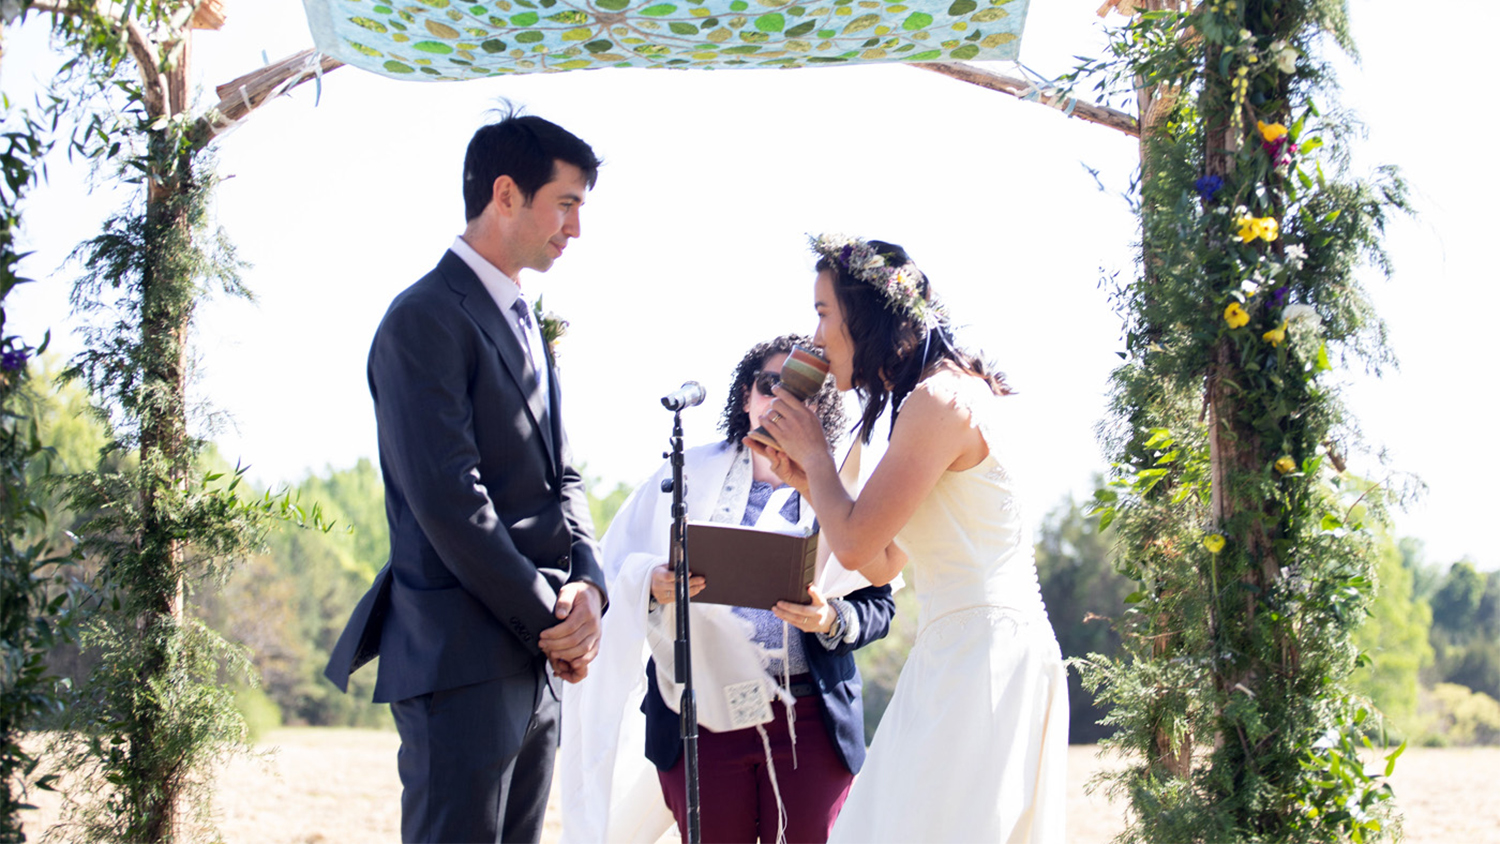 A bride and groom stand in front of a rabbi, while the bride drinks from a cup